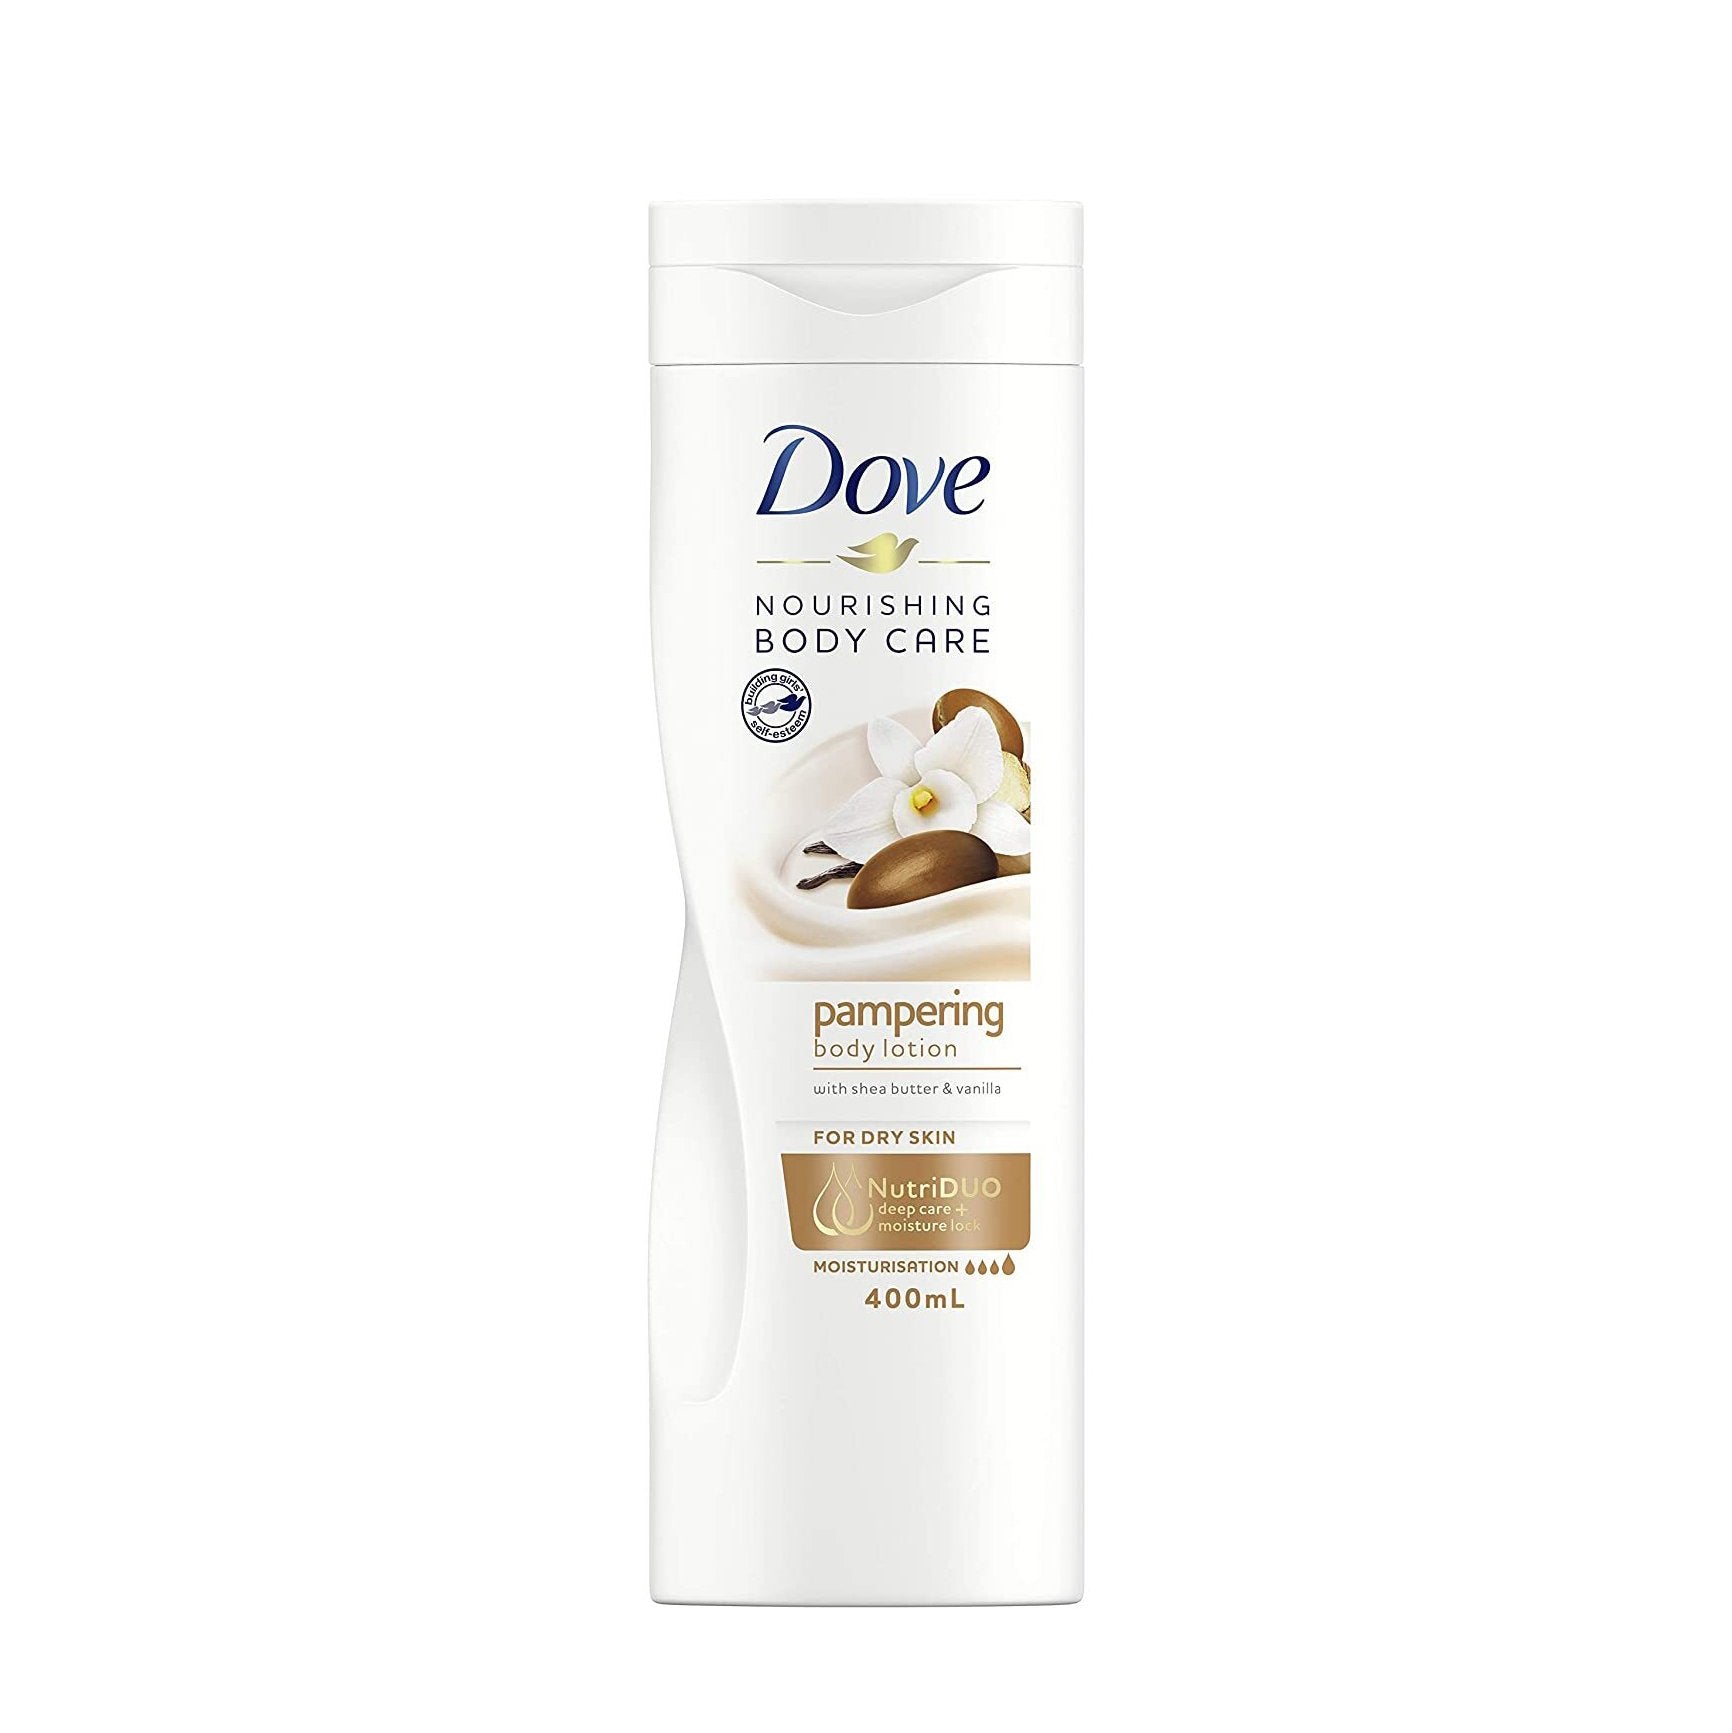 dove nourishing body care pampering body lotion